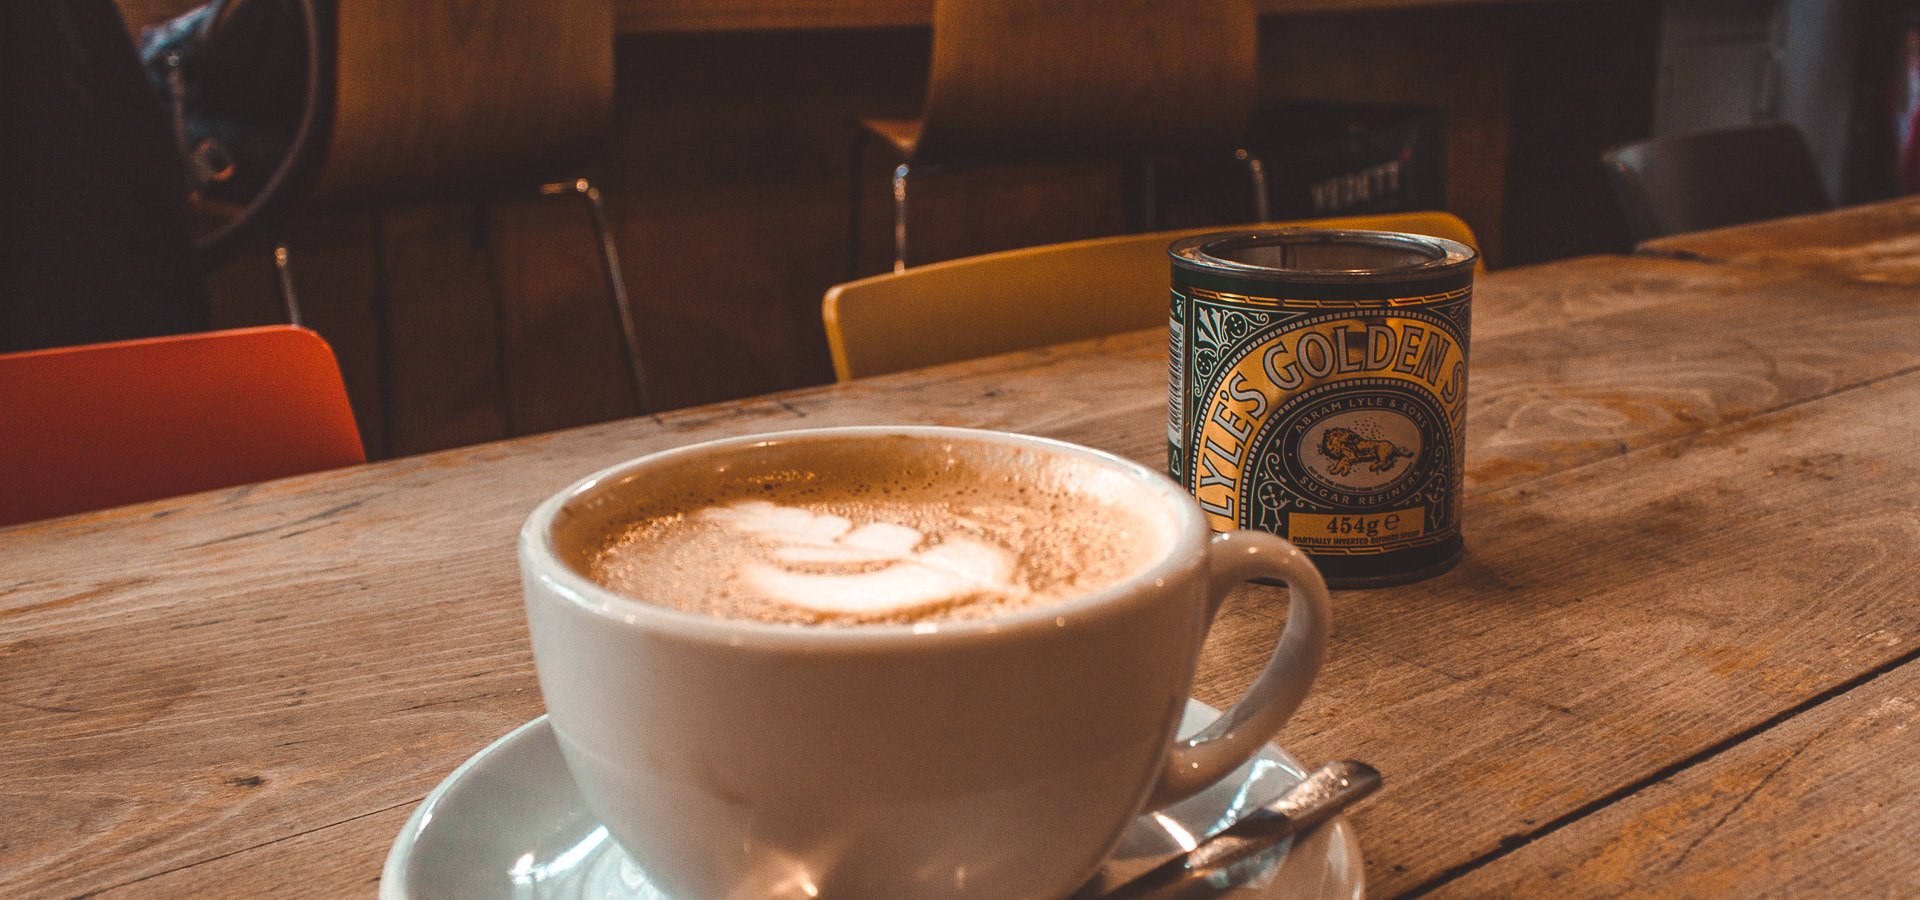 The Top 10 Cafes For Specialty Coffee In London | London Markets You Need To Visit 3